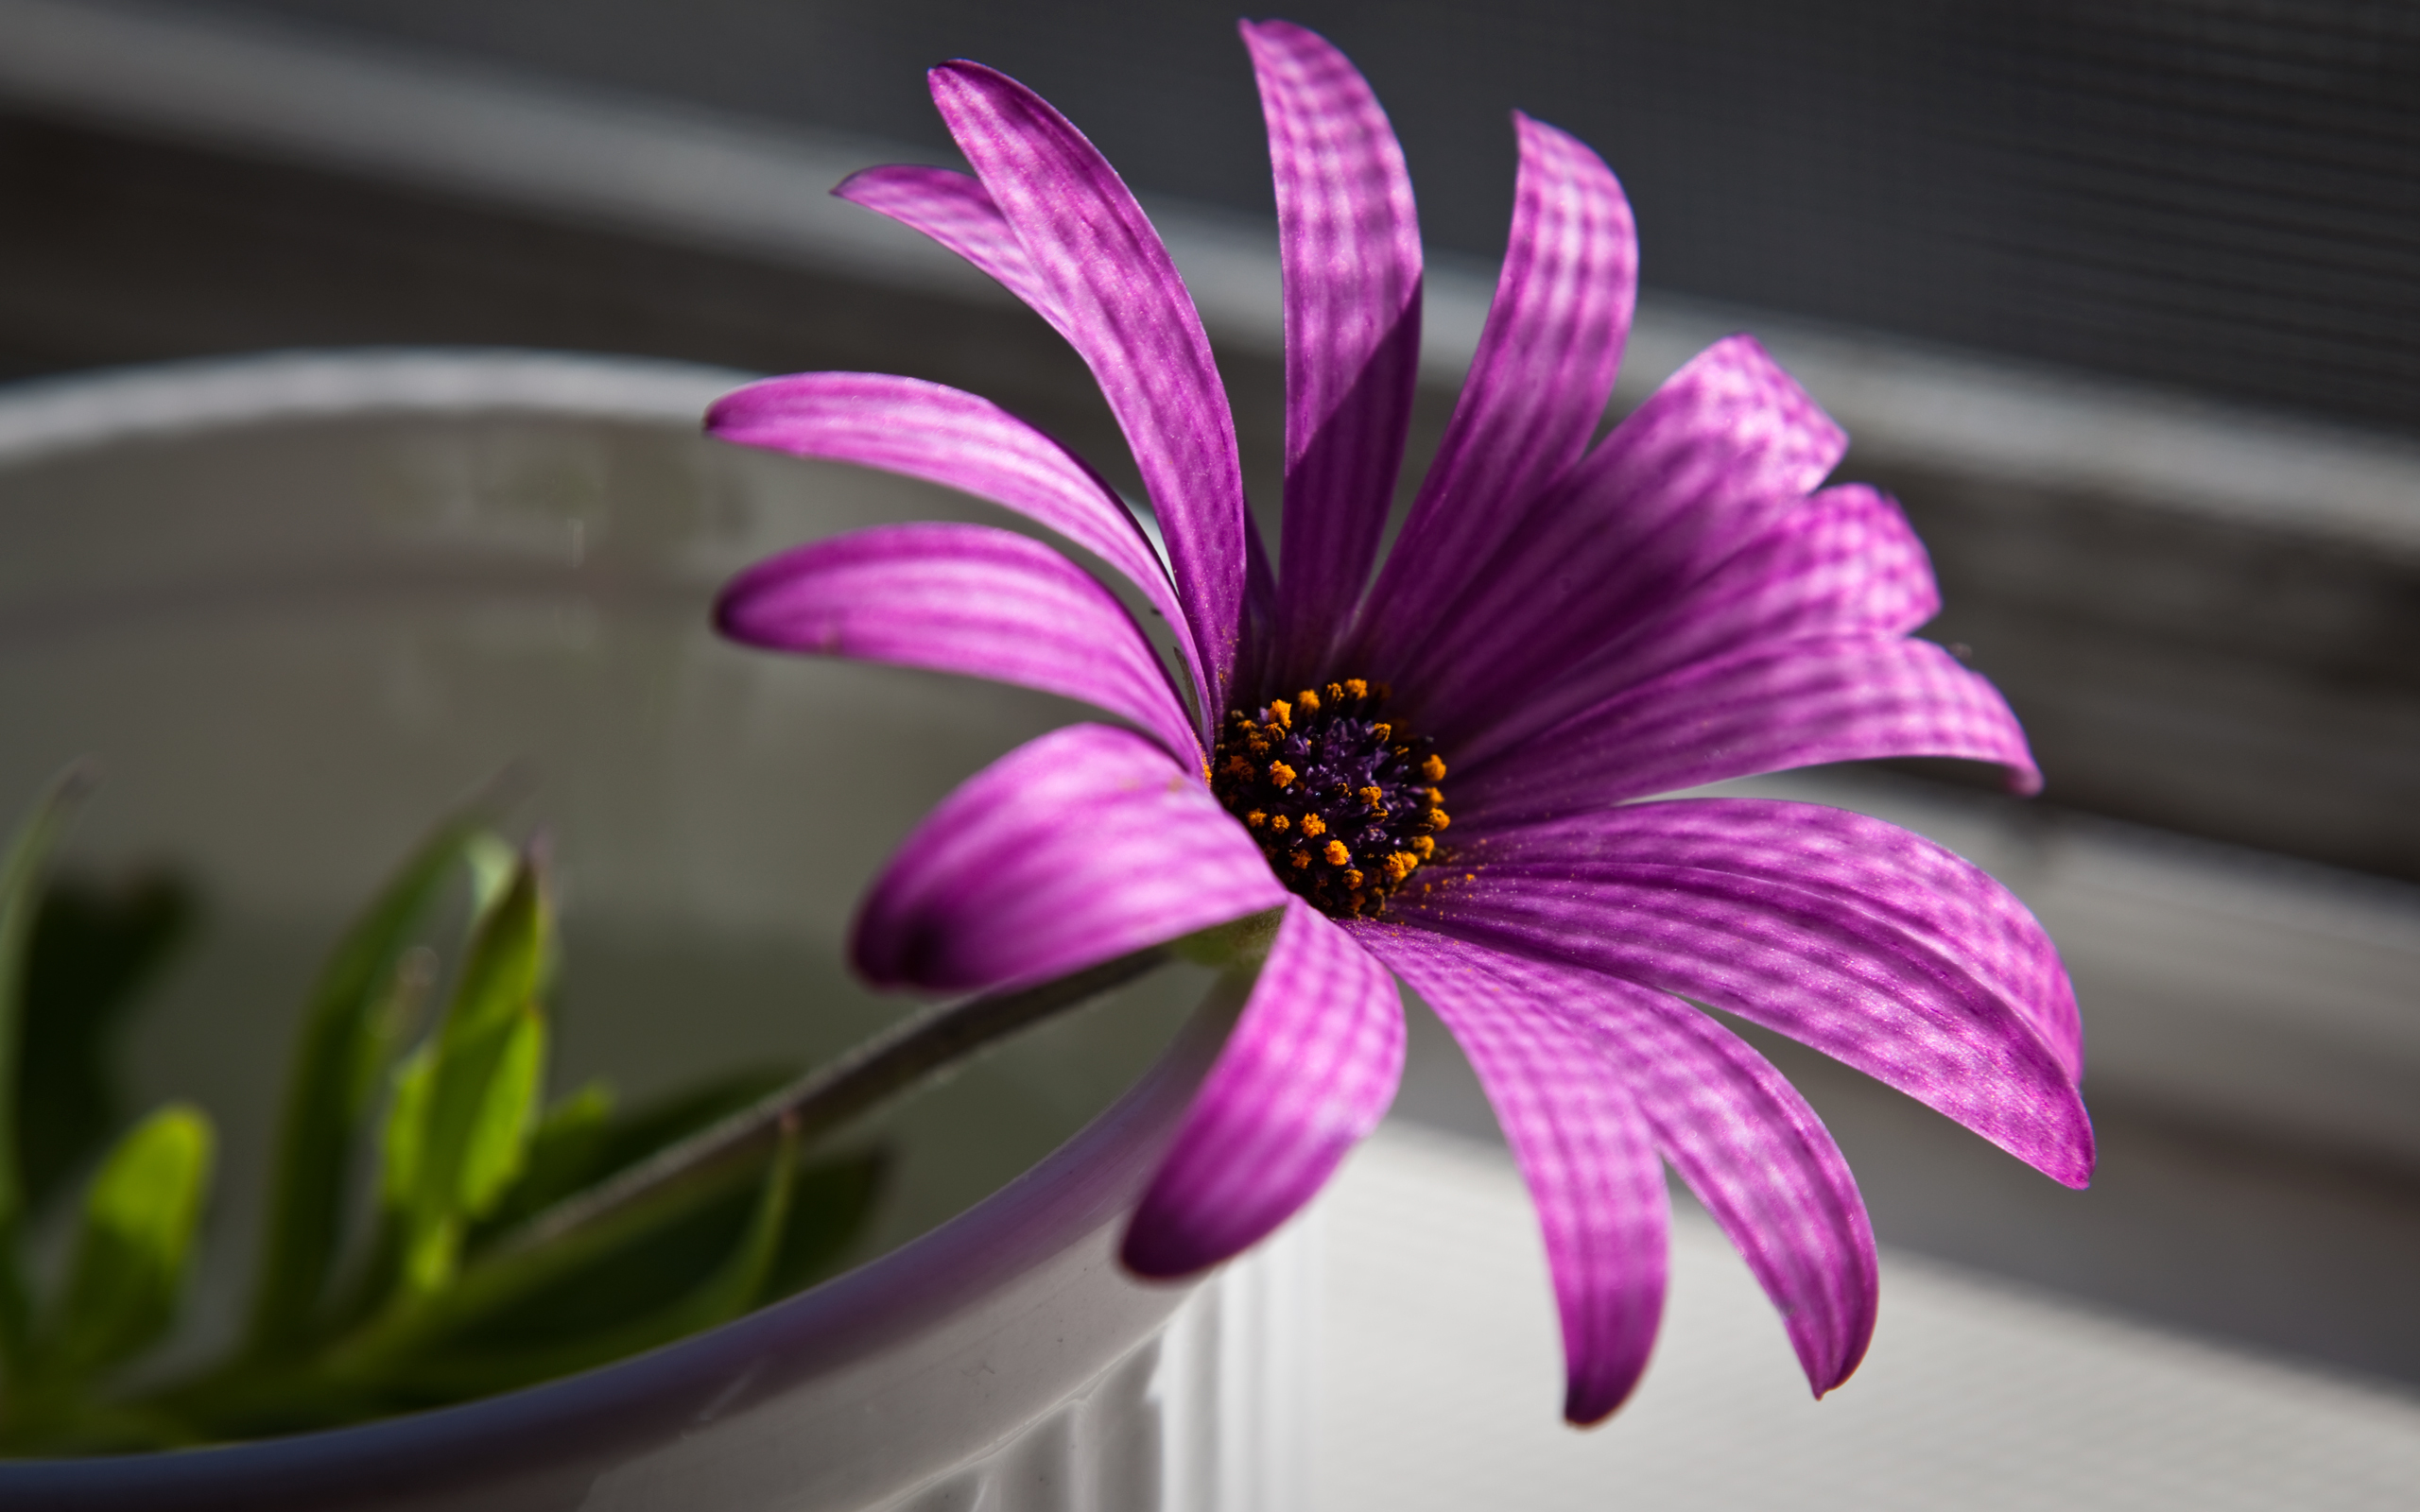 Purple flower wallpapers and images - wallpapers, pictures ...